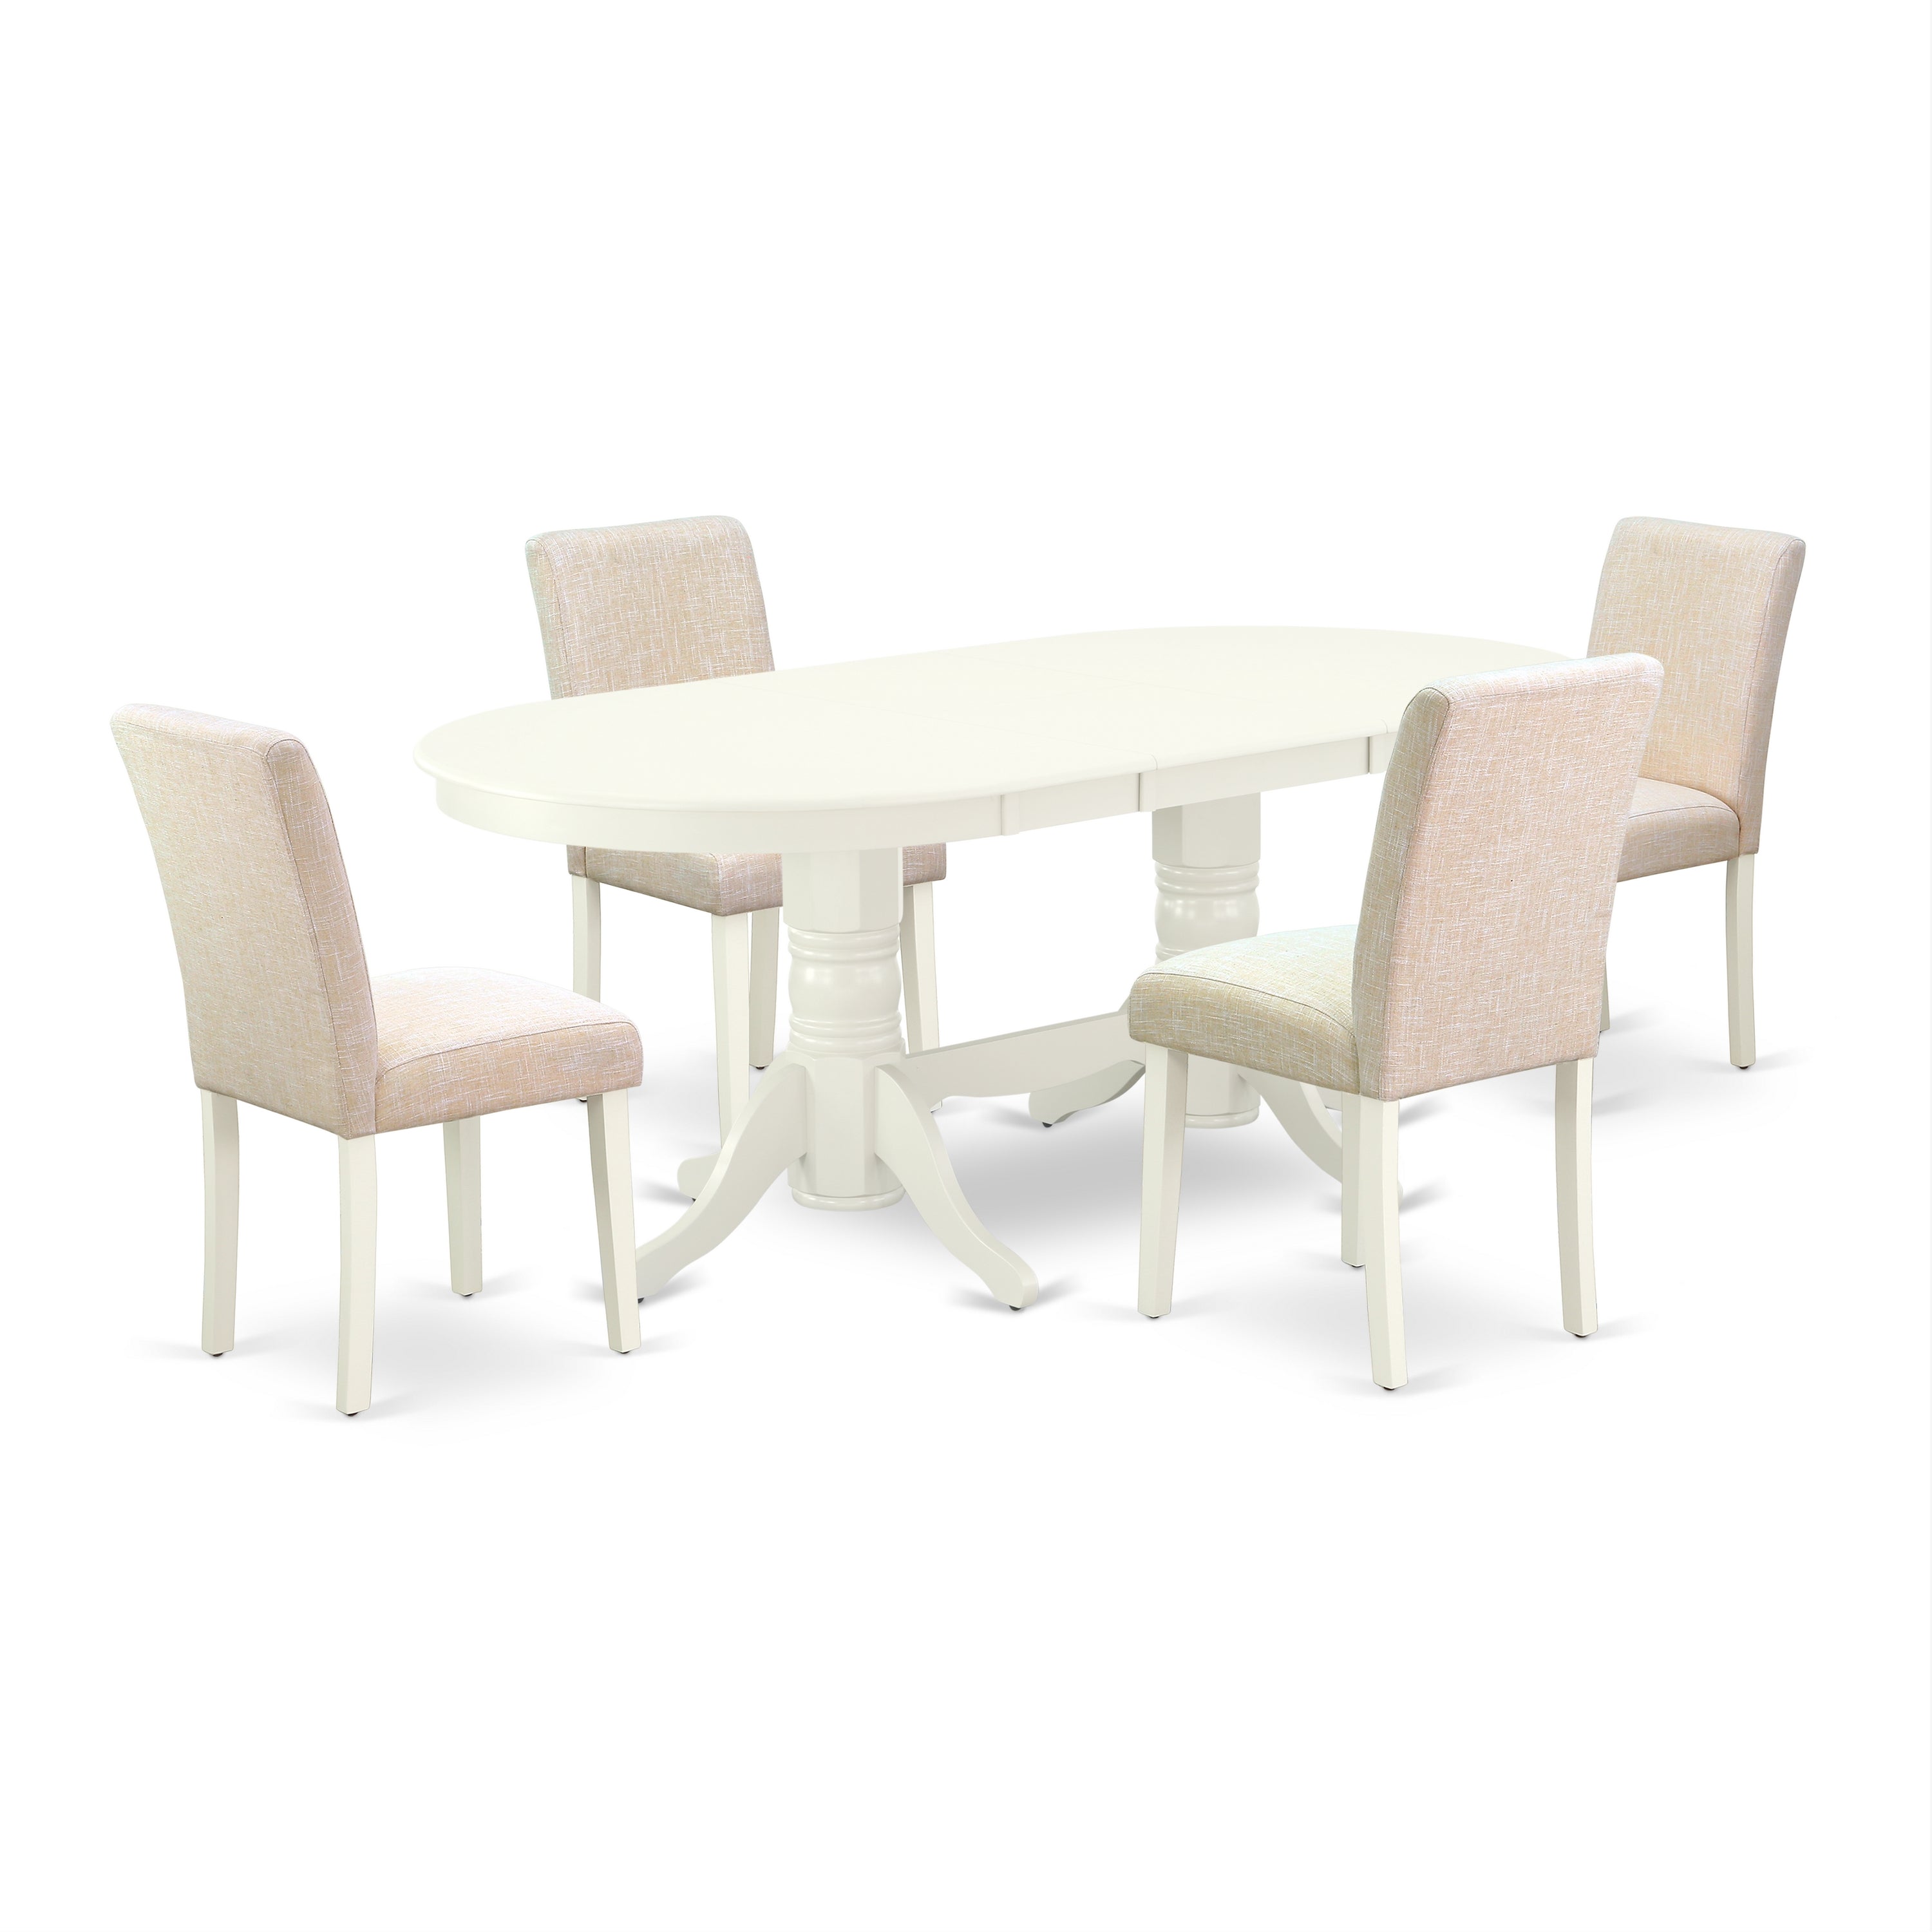 5 Pc Dining Room Oval Butterfly Table and Chairs Set in White and Beige